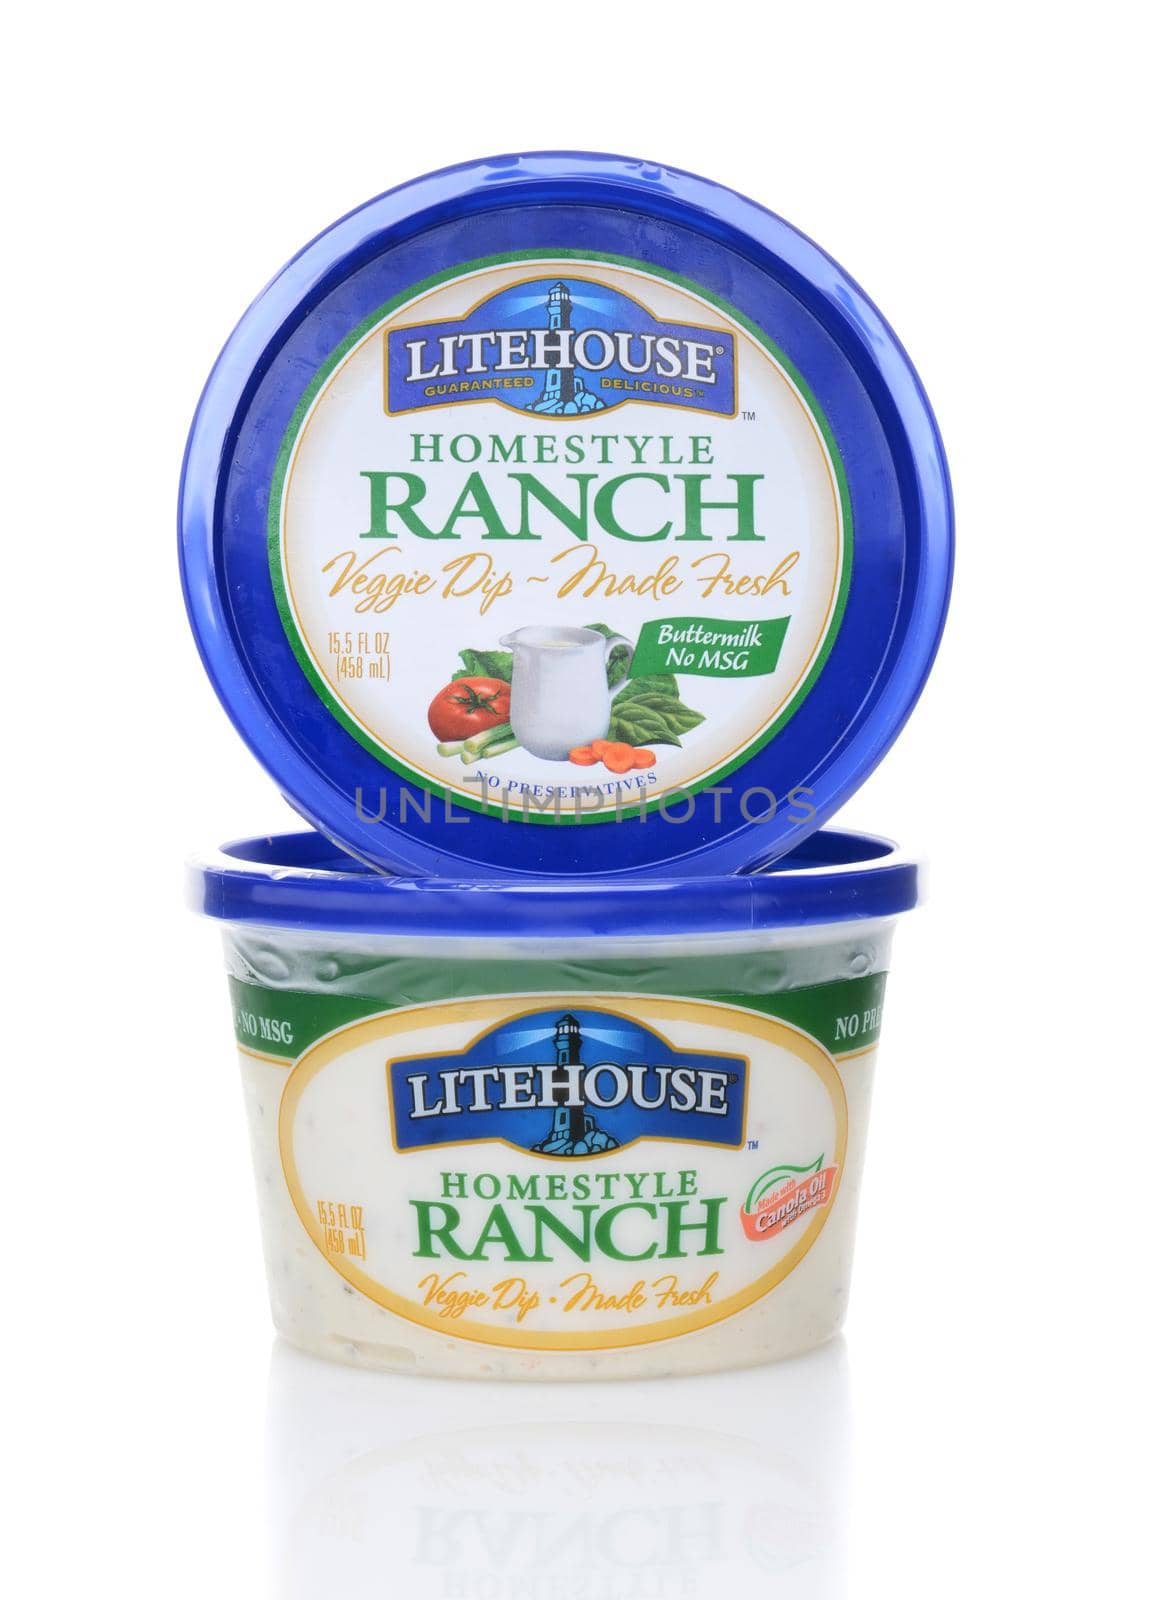 IRVINE, CA - JUNE 23, 2014: Two Containers of Lighthouse Homestyle Ranch Dip. Lighthouse produces over 40 flavors of dressings, dips, marinades, salsas and fresh herbs.